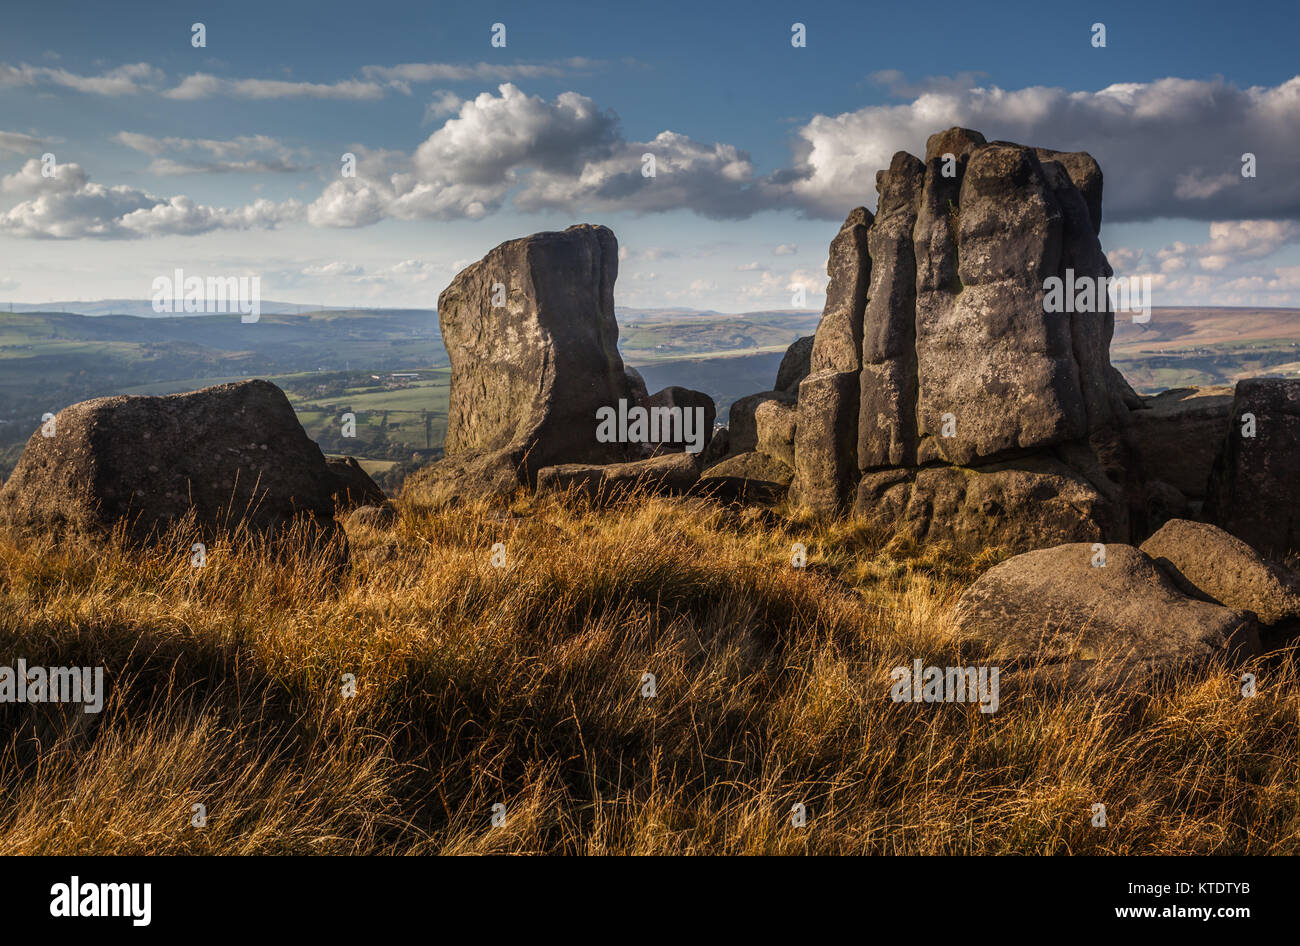 https://c8.alamy.com/comp/KTDTYB/rock-formations-called-kinder-stones-on-top-of-pots-n-pans-pots-and-KTDTYB.jpg